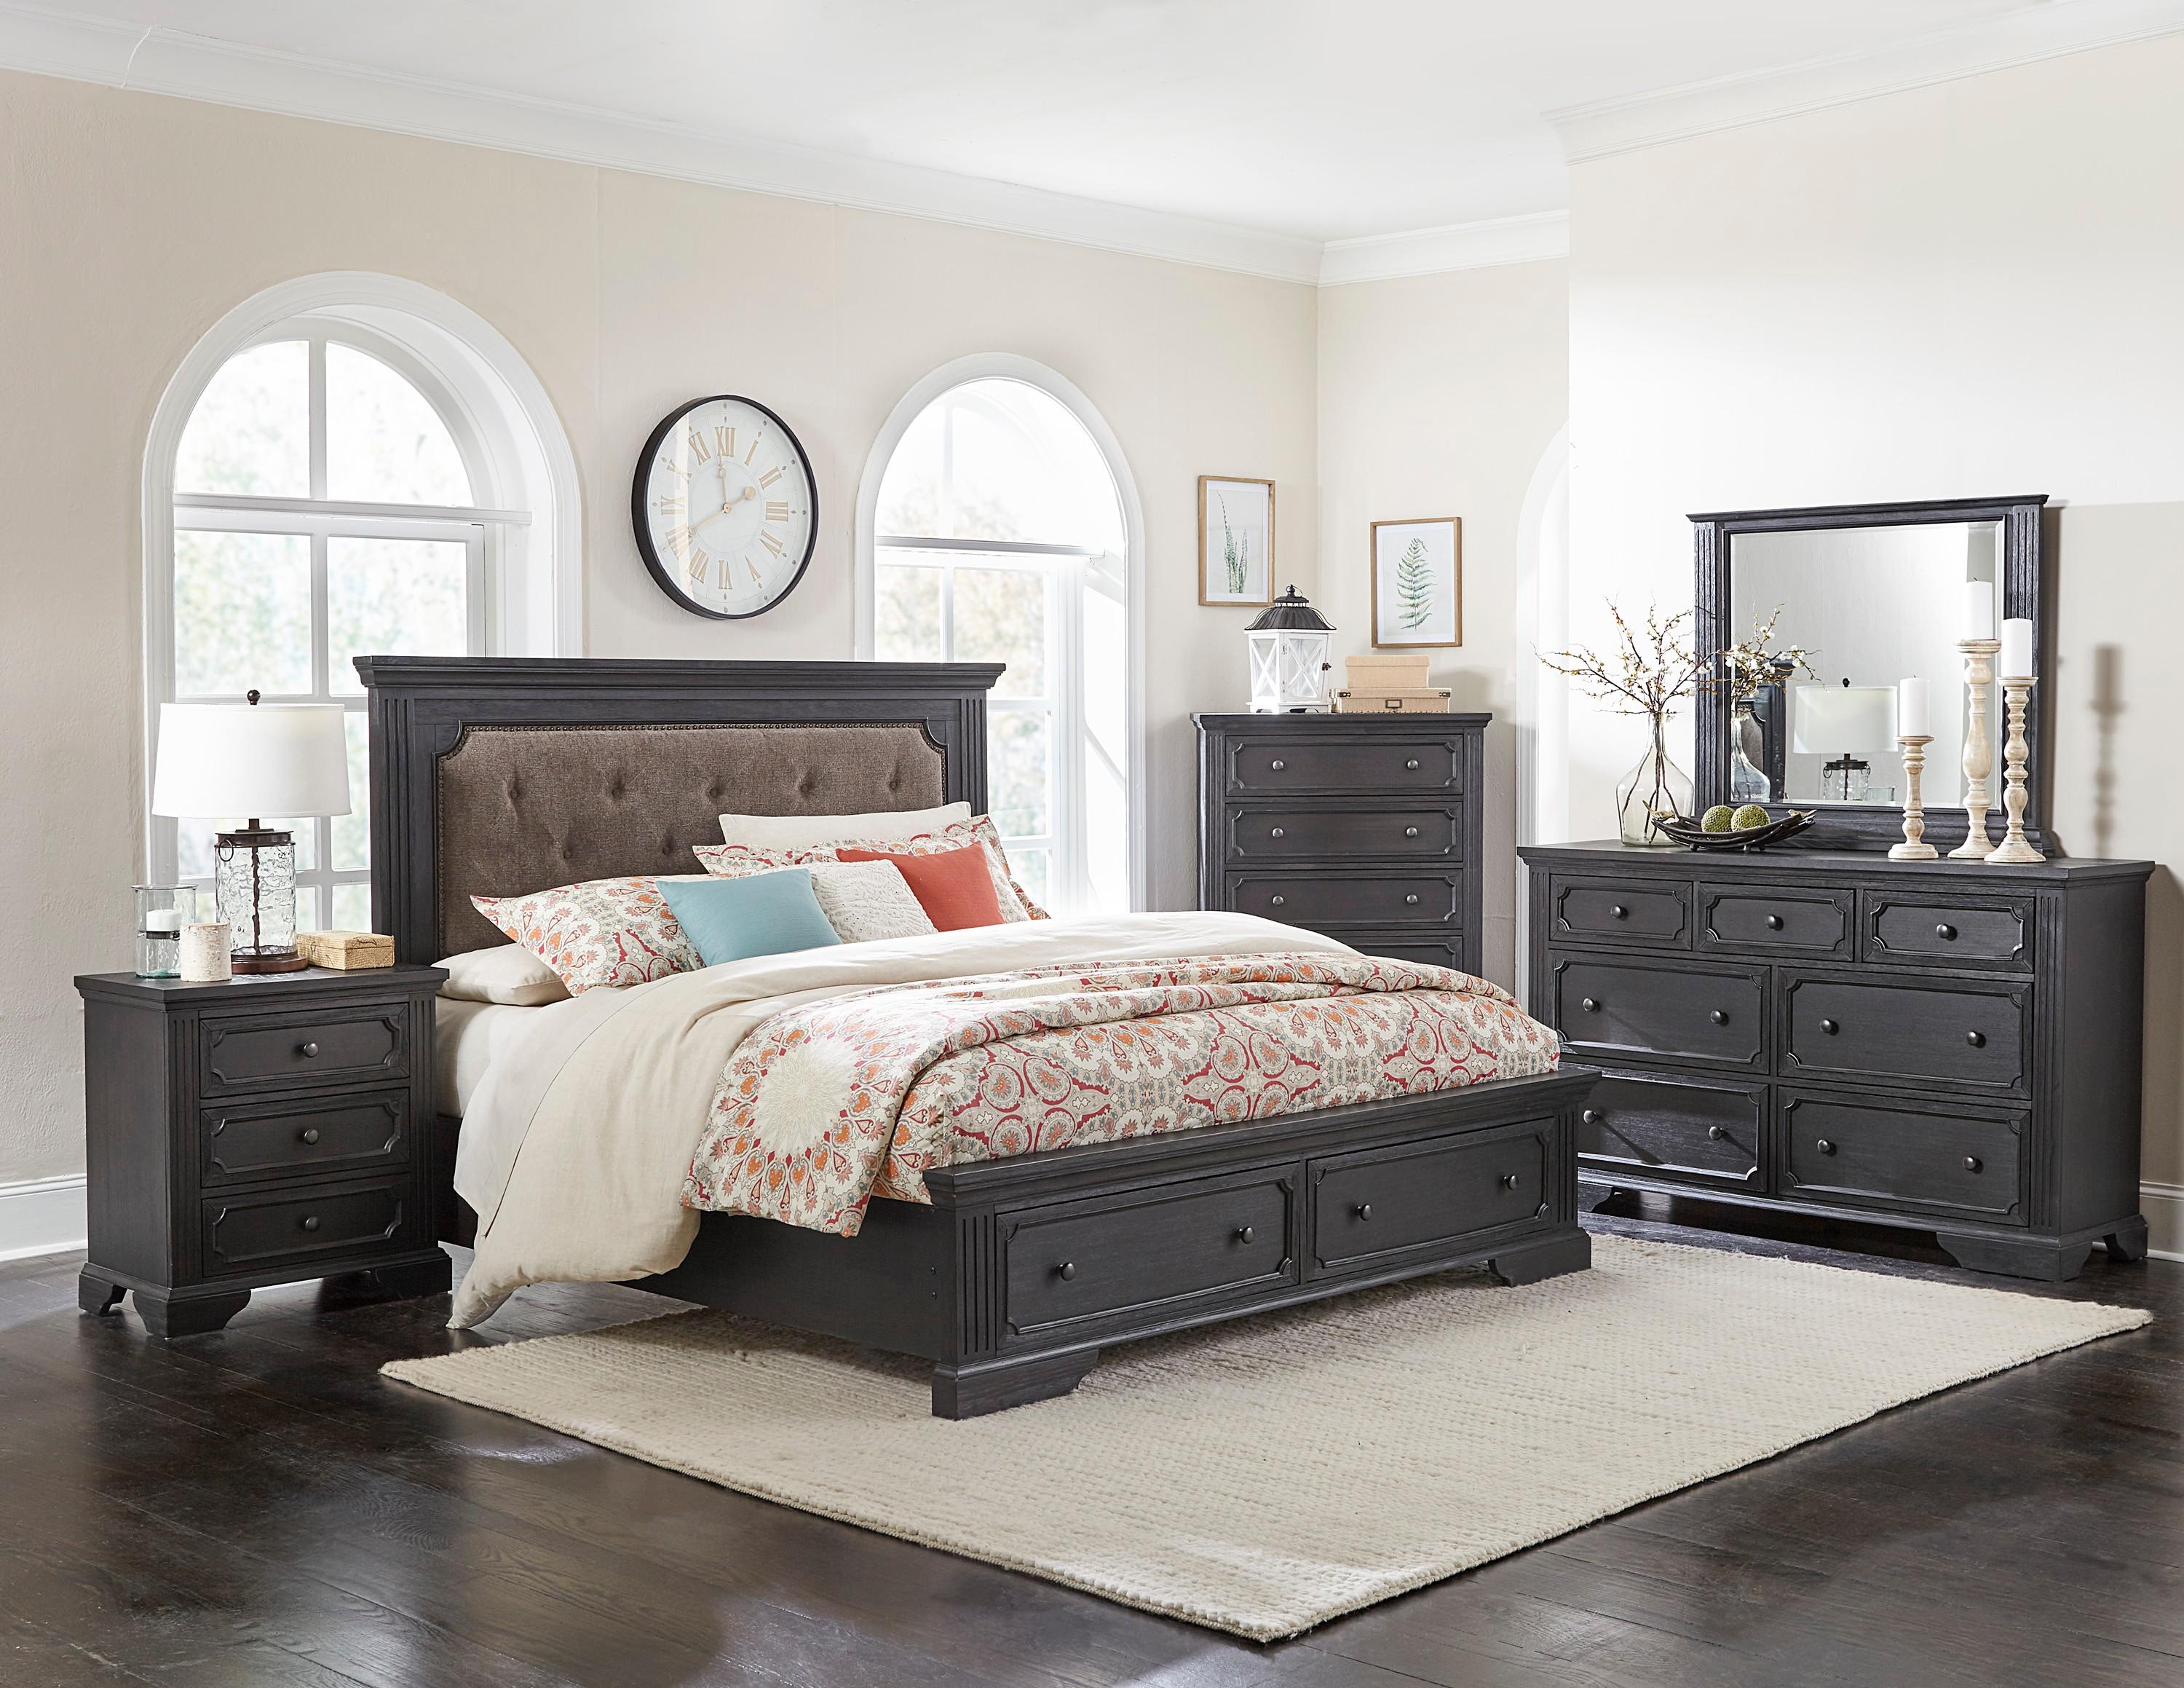 Rustic Bedroom Set 1647K-1CK-6PC Bolingbrook 1647K-1CK-6PC in Charcoal Polyester